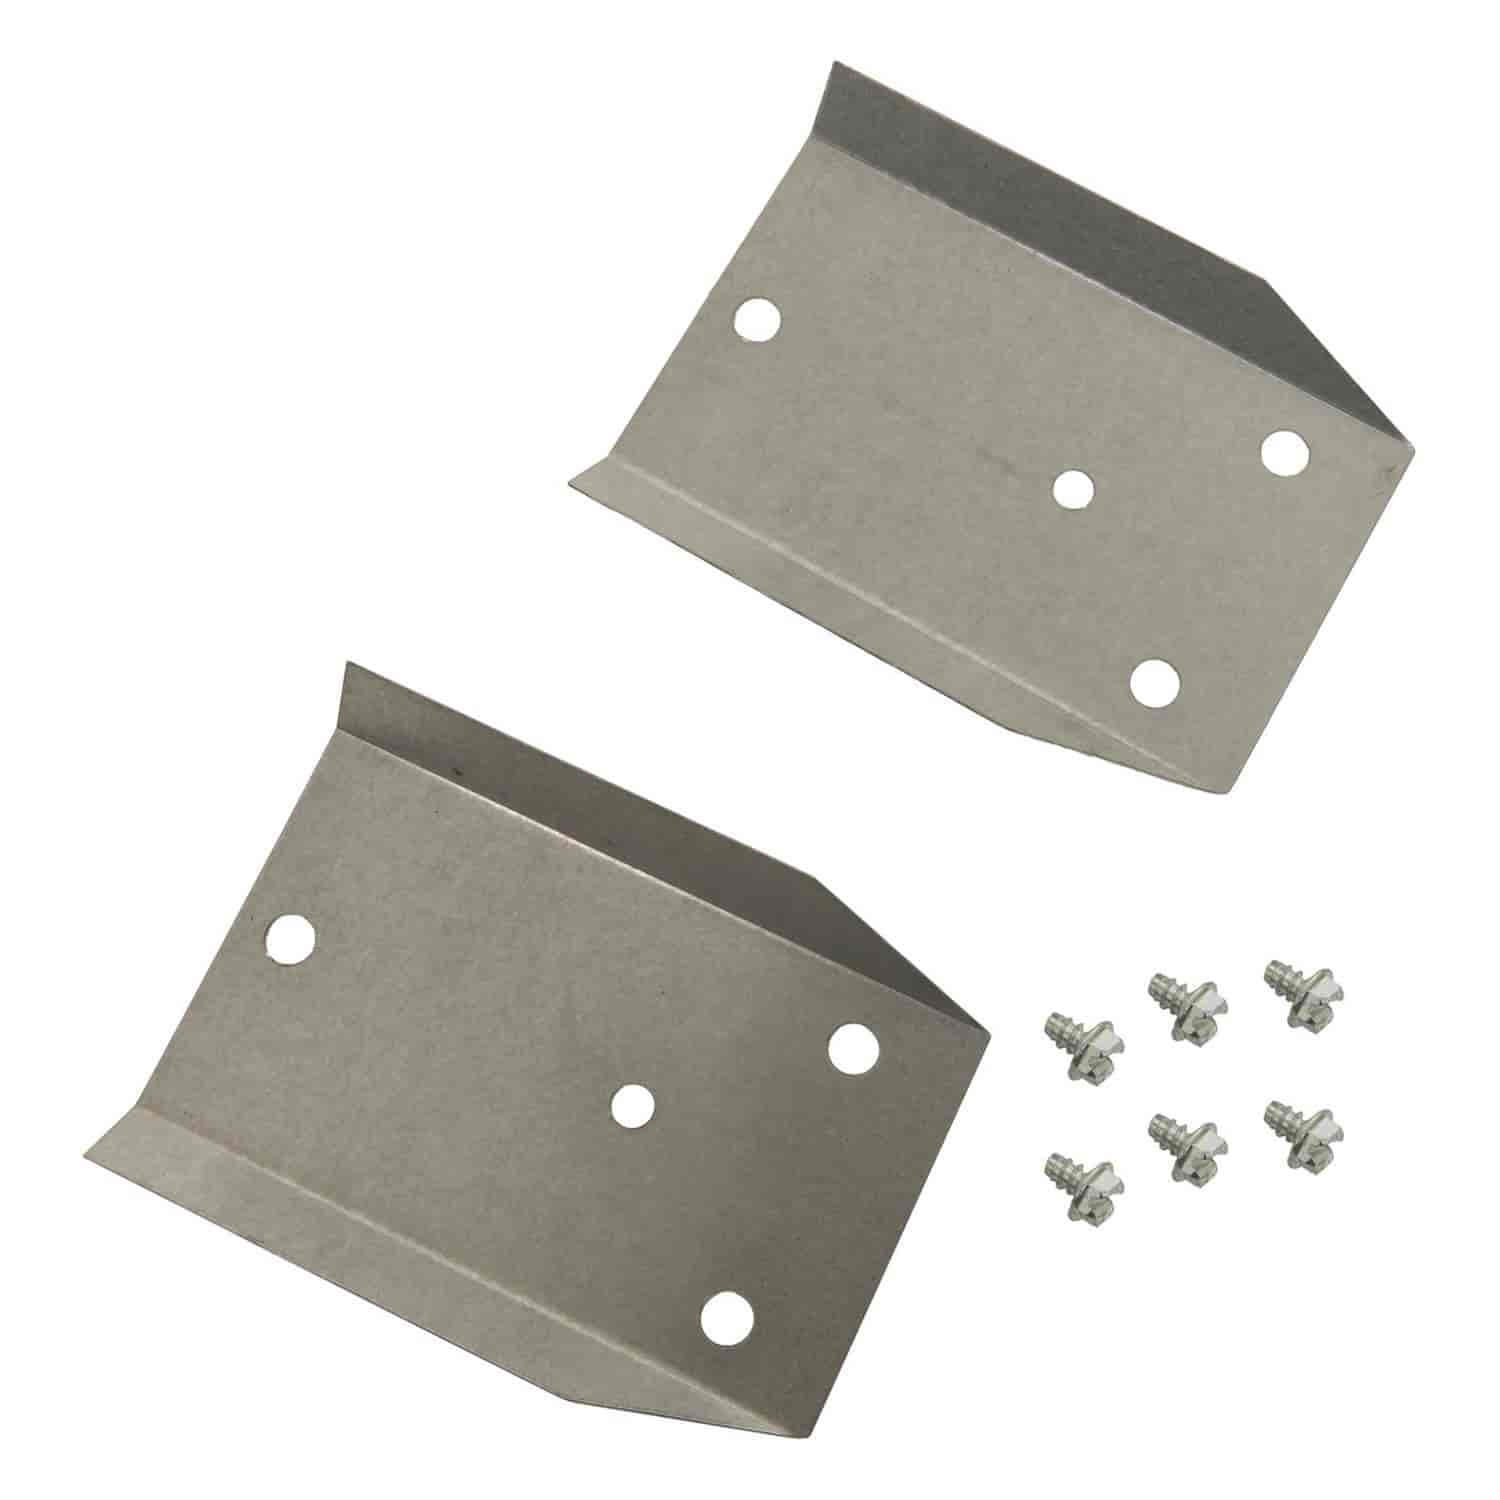 Replacement Baffles & Screws Fits All Valve Covers Shown Above except P4876388